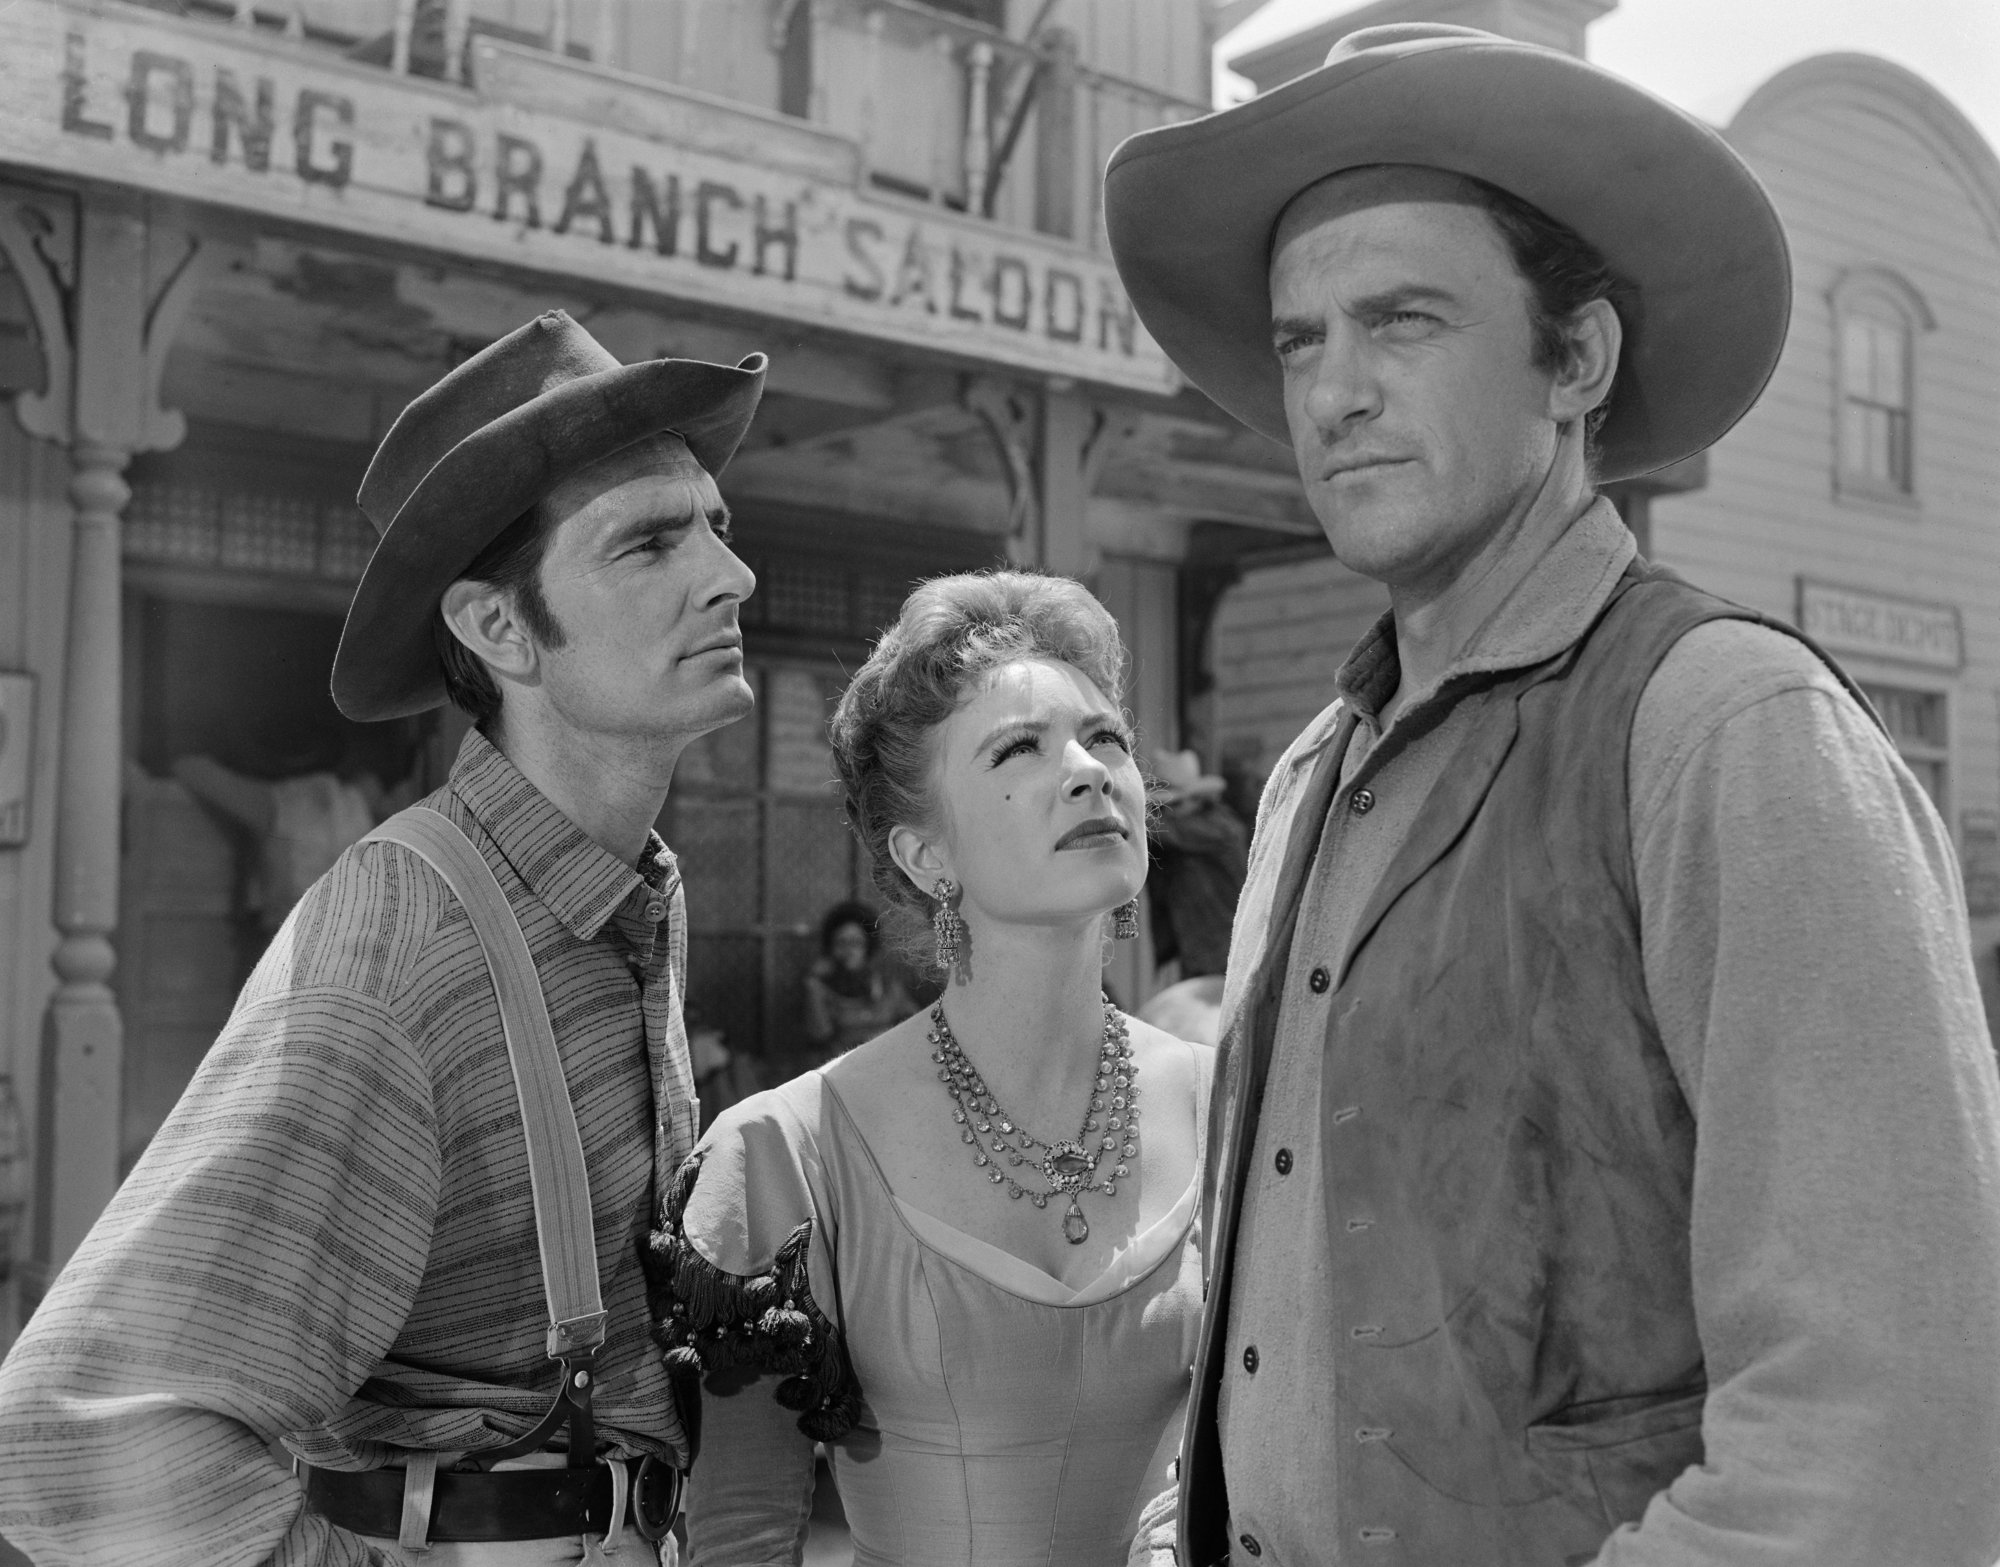 Successful show 'Gunsmoke' Dennis Weaver as Chester Goode, Amanda Blake as Kitty Russell and James Arness as Marshal Matt Dillon. Matt is looking onward, while Kitty and Chester are looking at him. The Long Branch Saloon in the background.